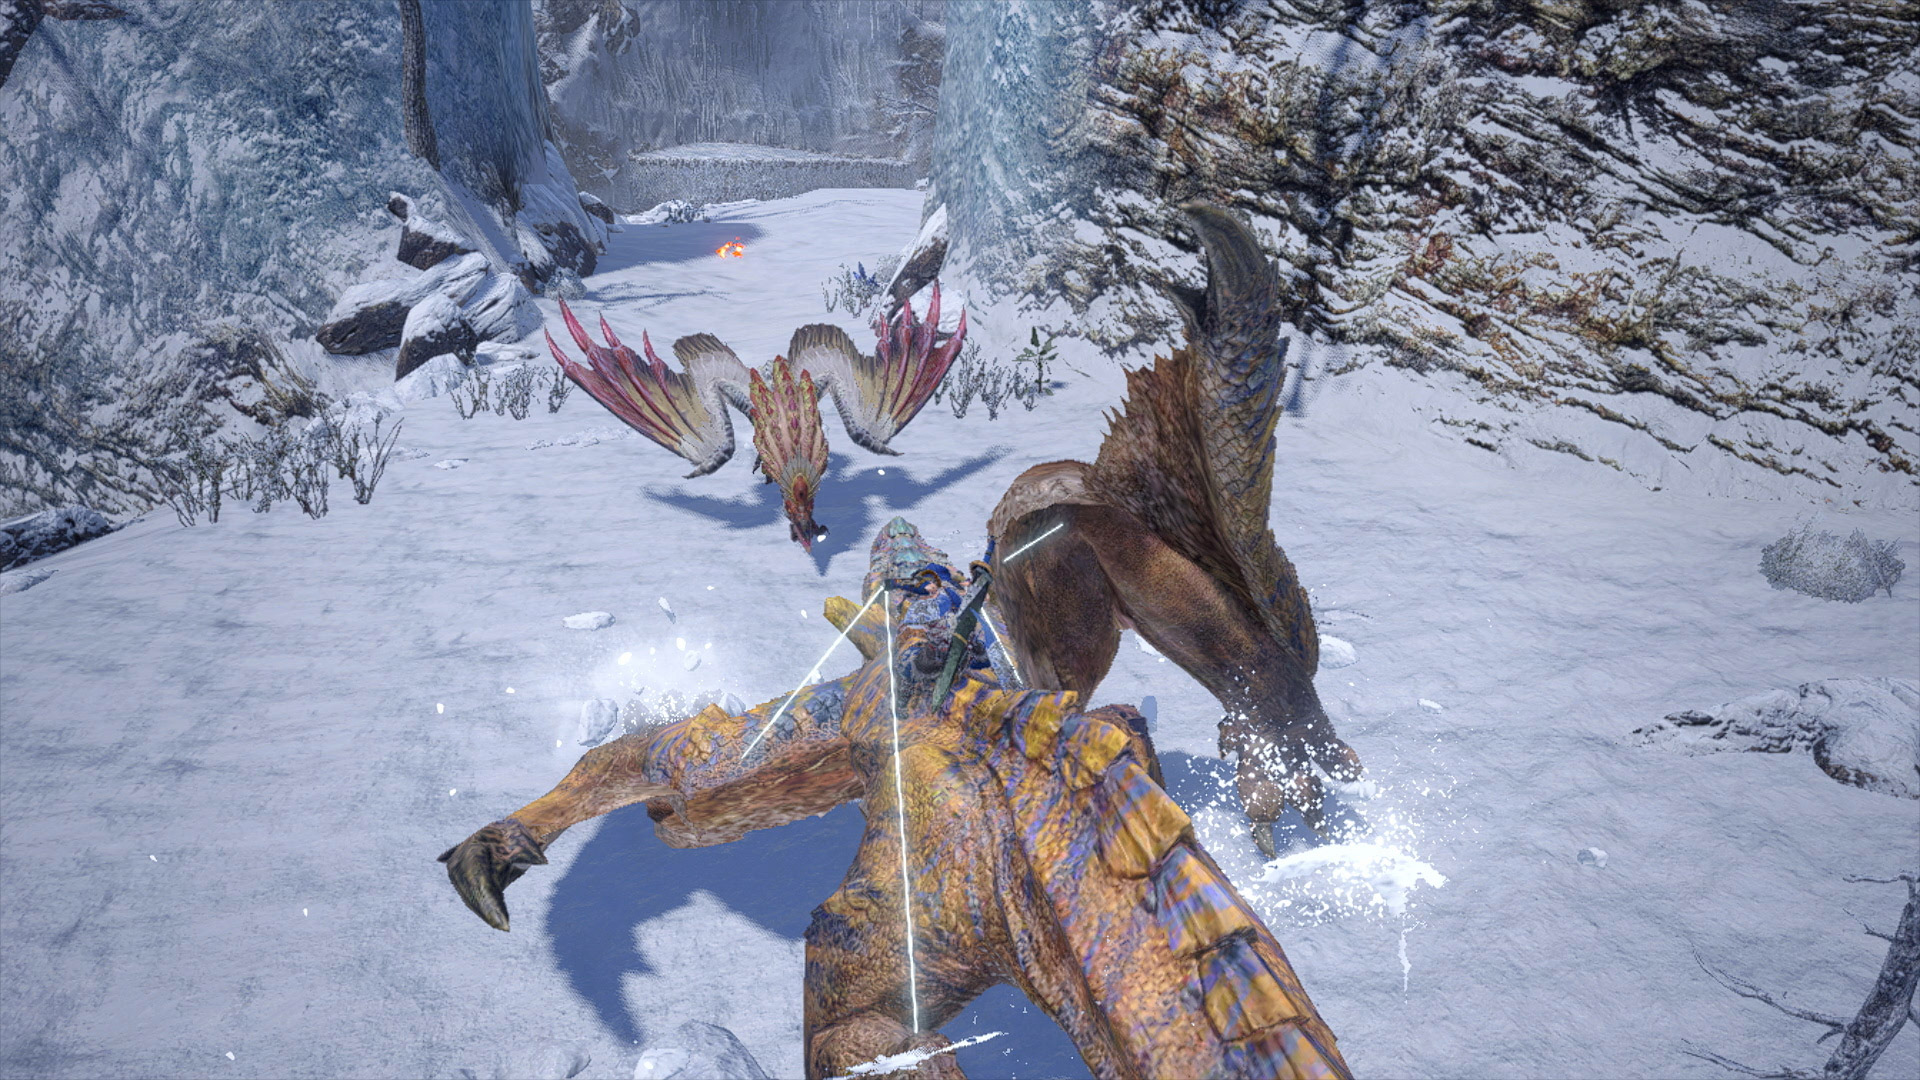 You're my wyvern now.